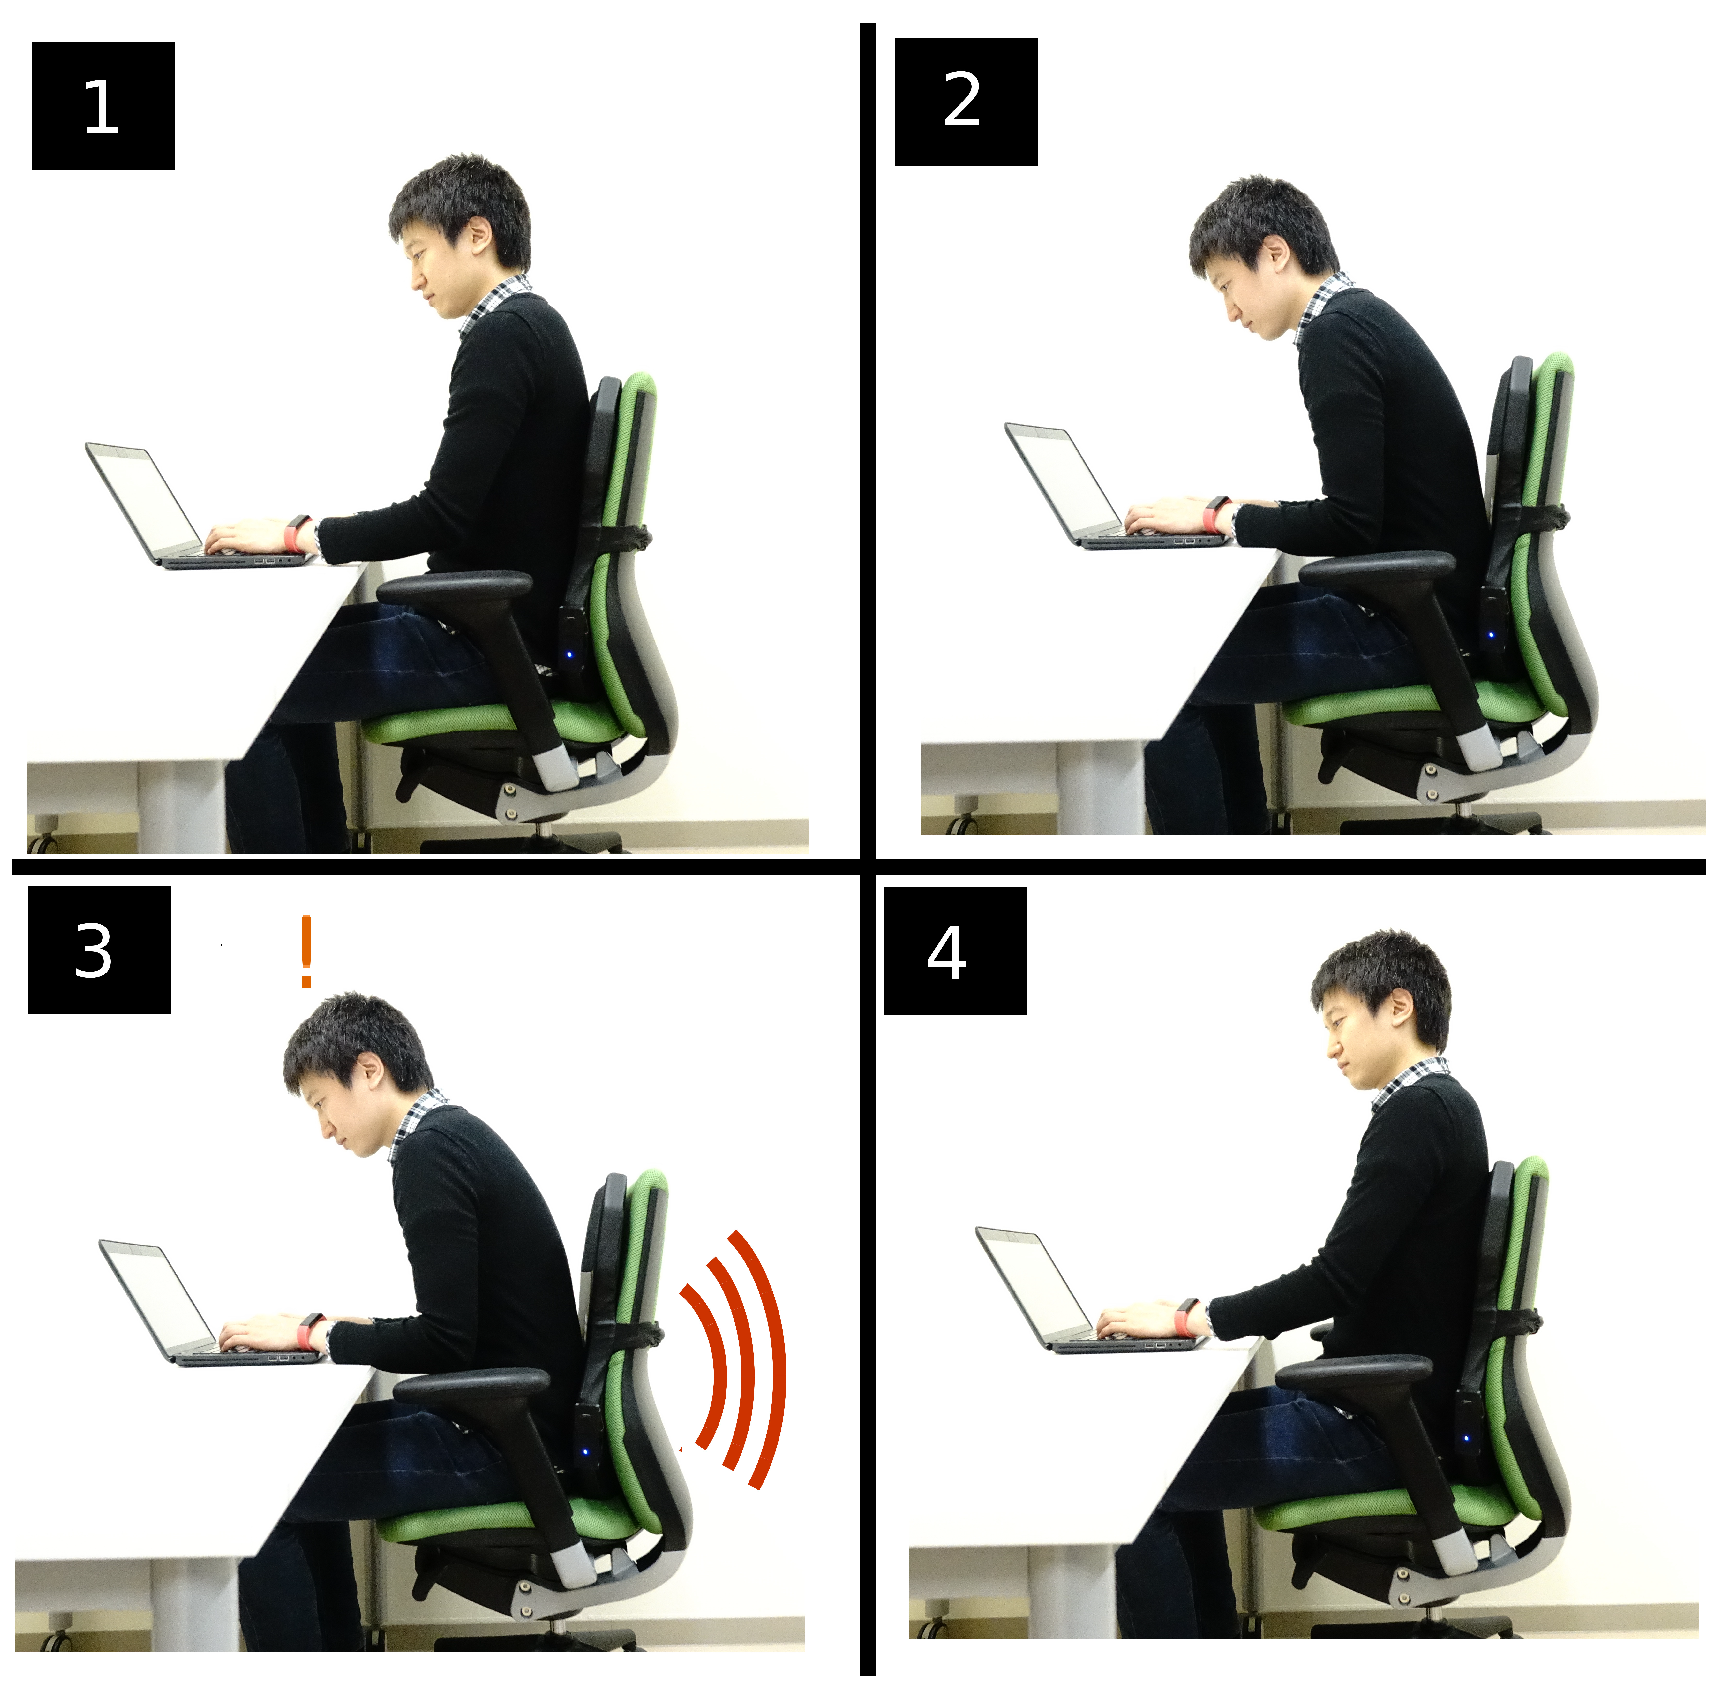 NUNETH Straight Back Posture Corrector for Office Chair, Men Women  Ergonomic Desk Chair, Relieve Back Pain/Support Lumbar/Correct Sitting  Posture